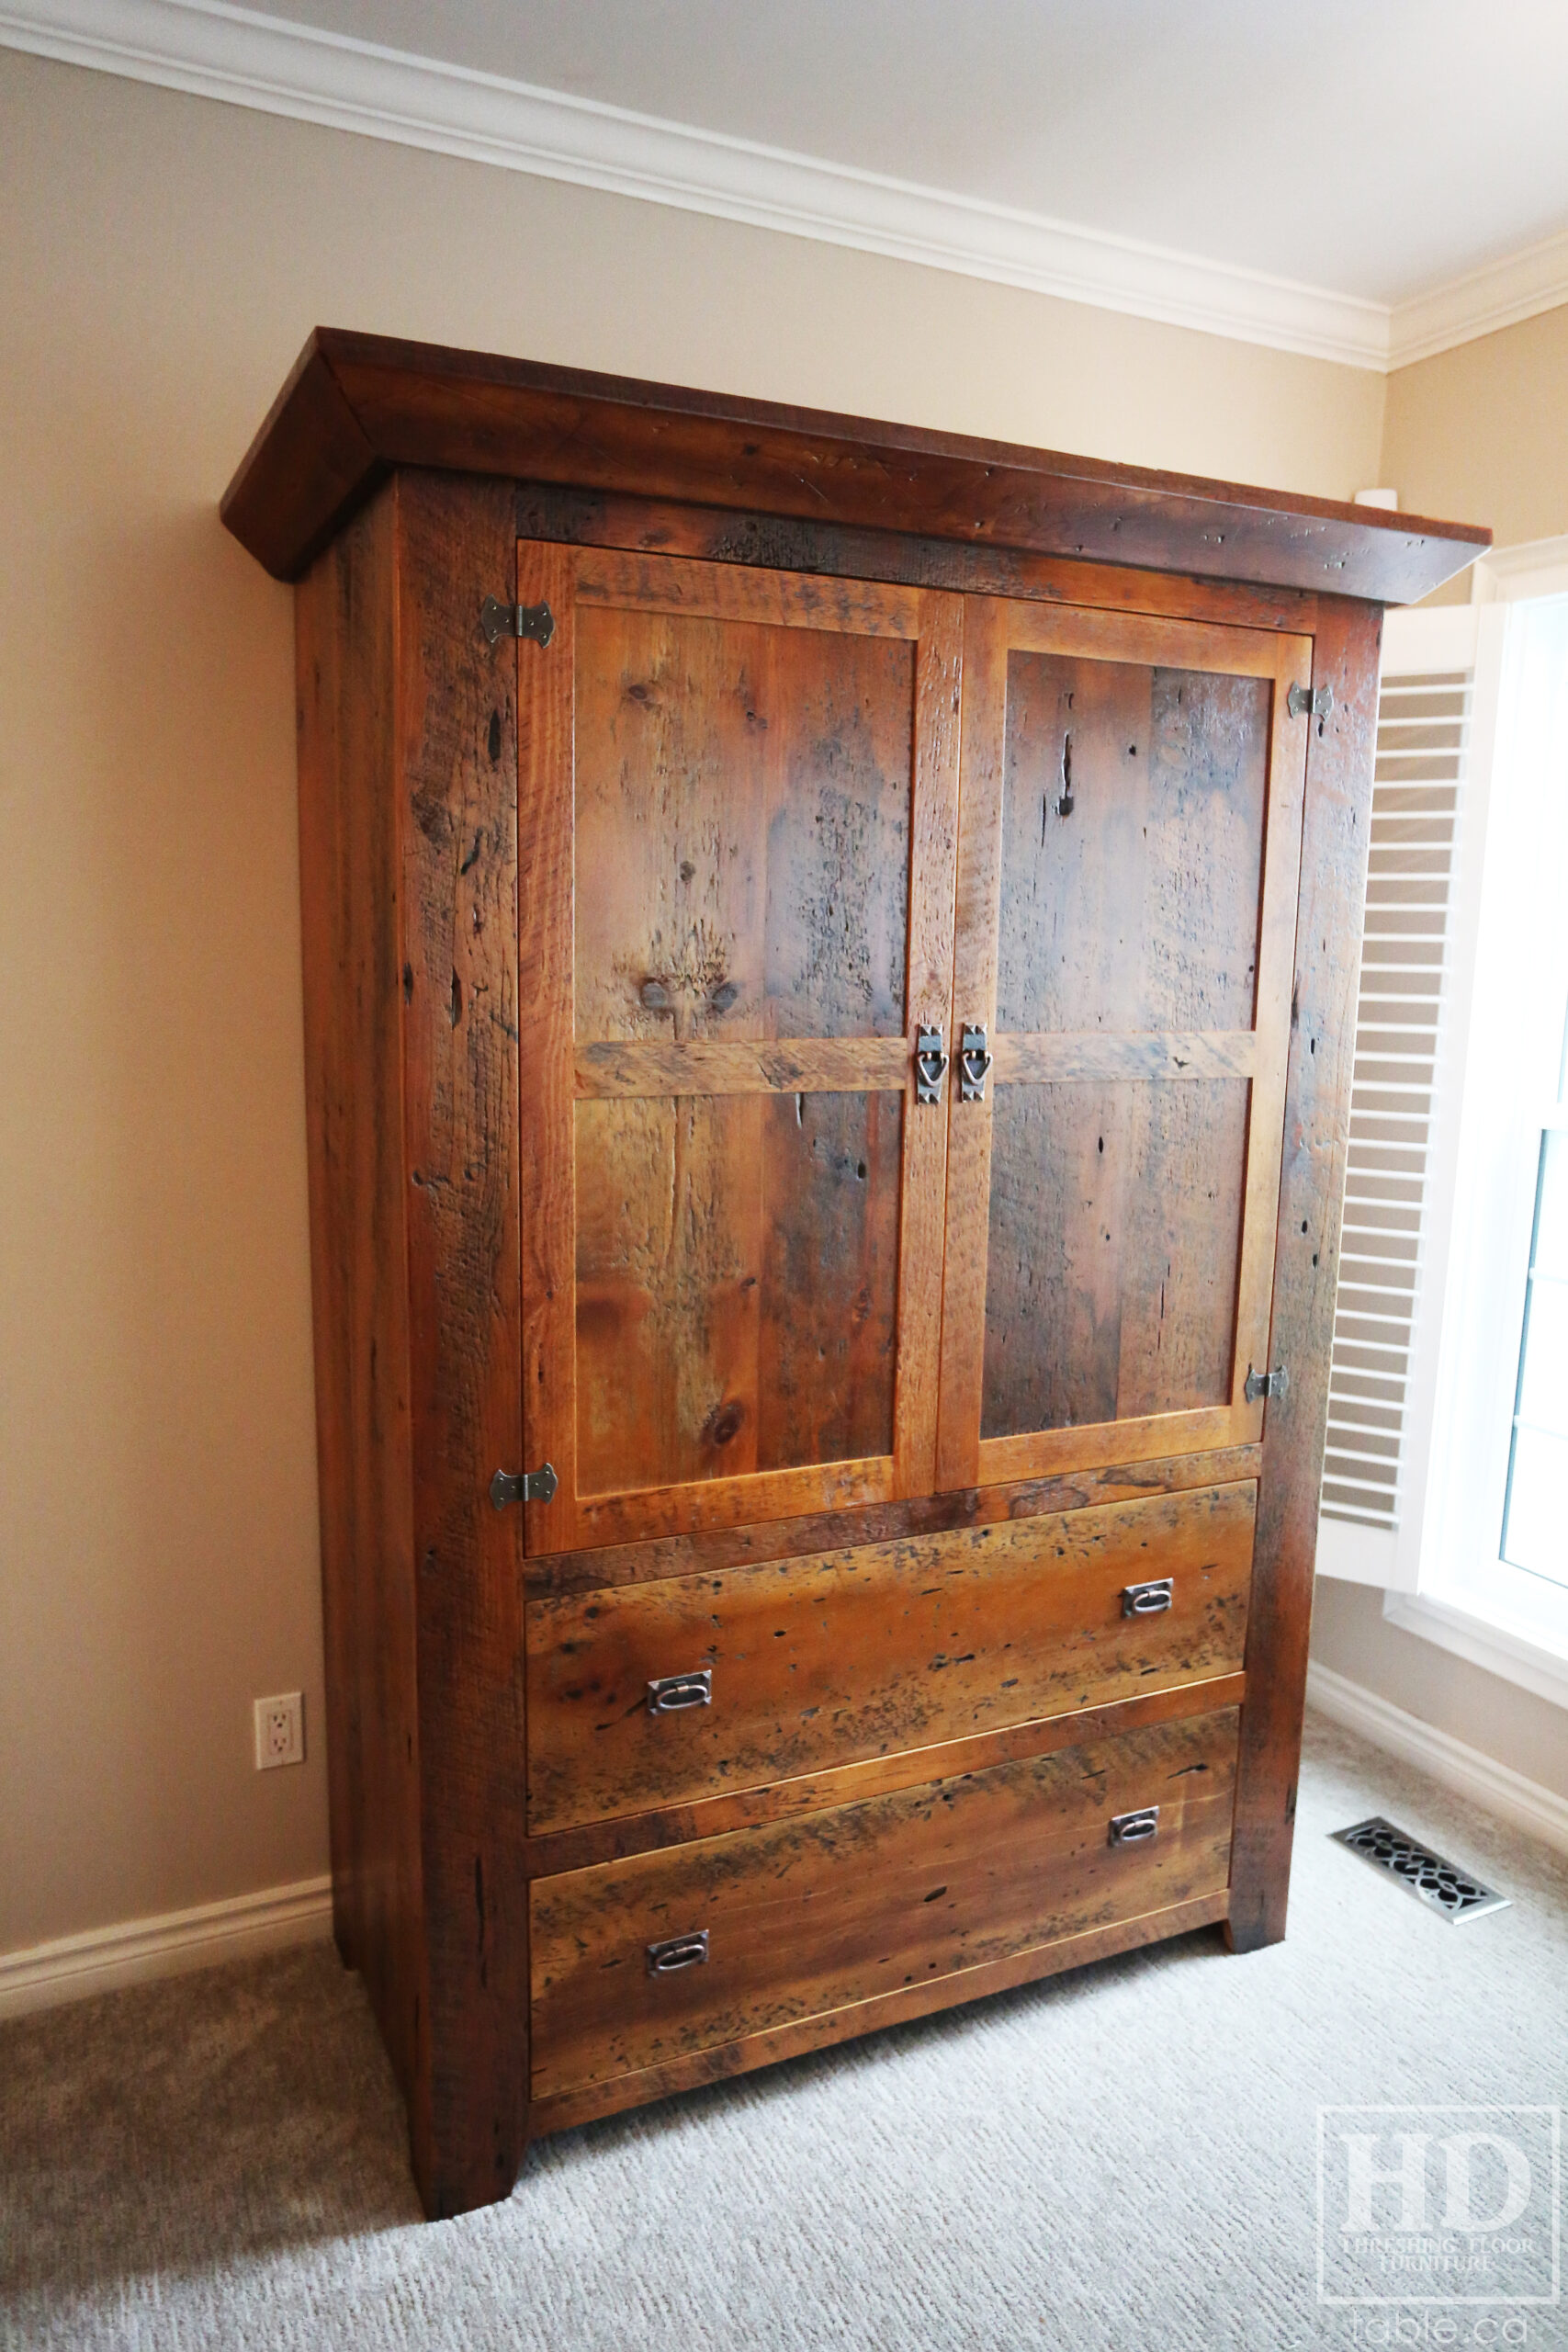 Reclaimed Ontario Barnwood Armoire - Old Growth Hemlock Threshing Floor & Grainery Board Construction - 2 Doors / 2 Drawers - Internal Hanging Option on top portion -  Original edges & distressing maintained - Cast Brass Lee Valley Hardware - Crown Molding - Satin polyurethane finish - www.table.ca